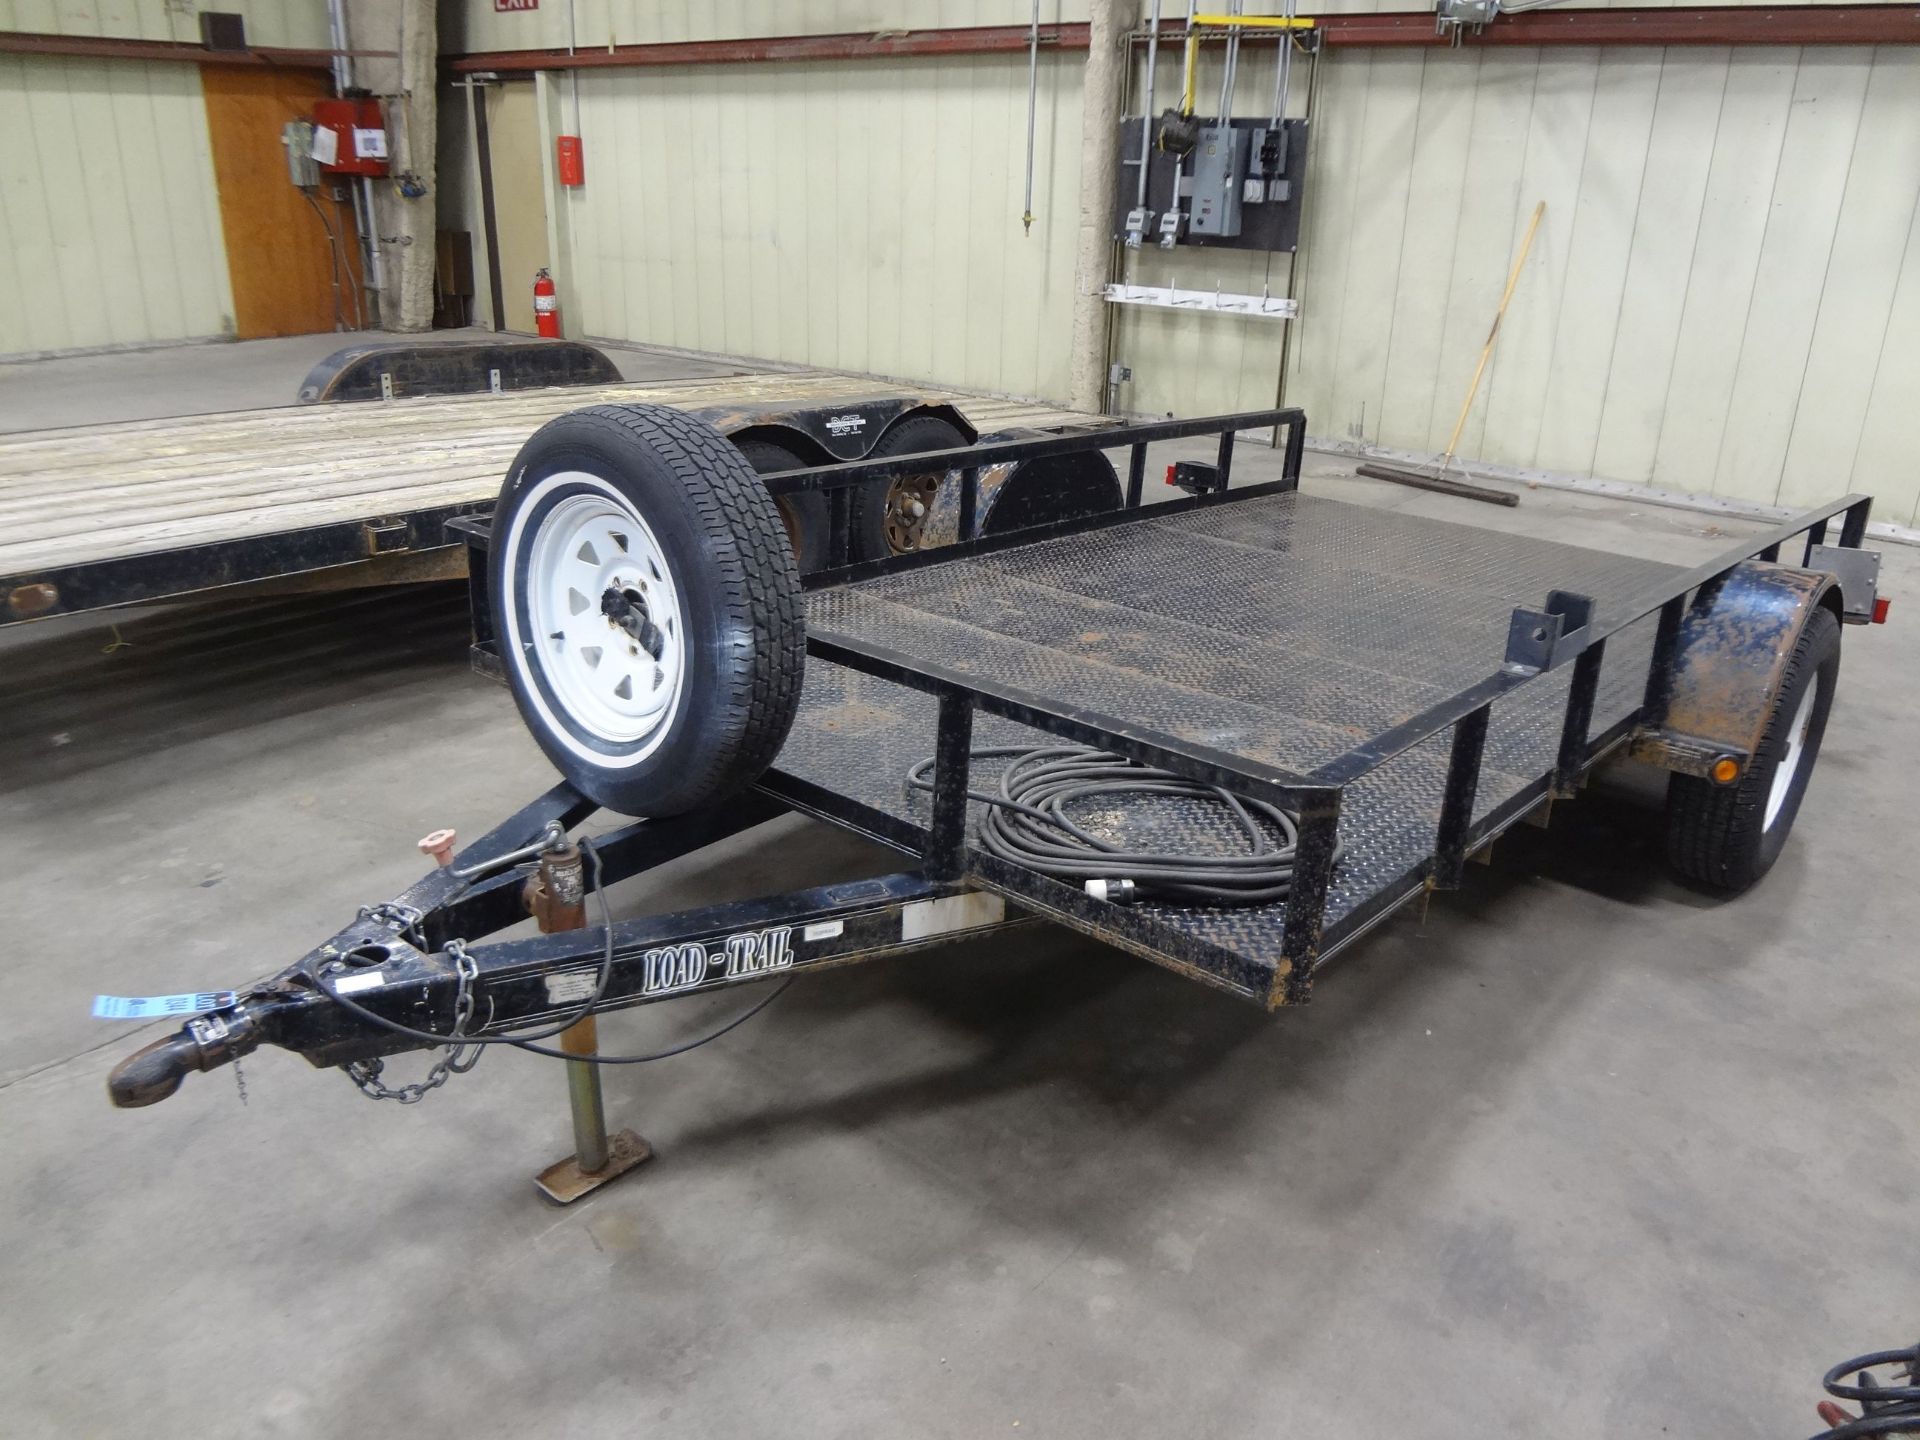 12' LOAD-TRAIL SINGLE AXEL TRAILER, 2" BALL HITCH, STEEL DECK - Image 4 of 4